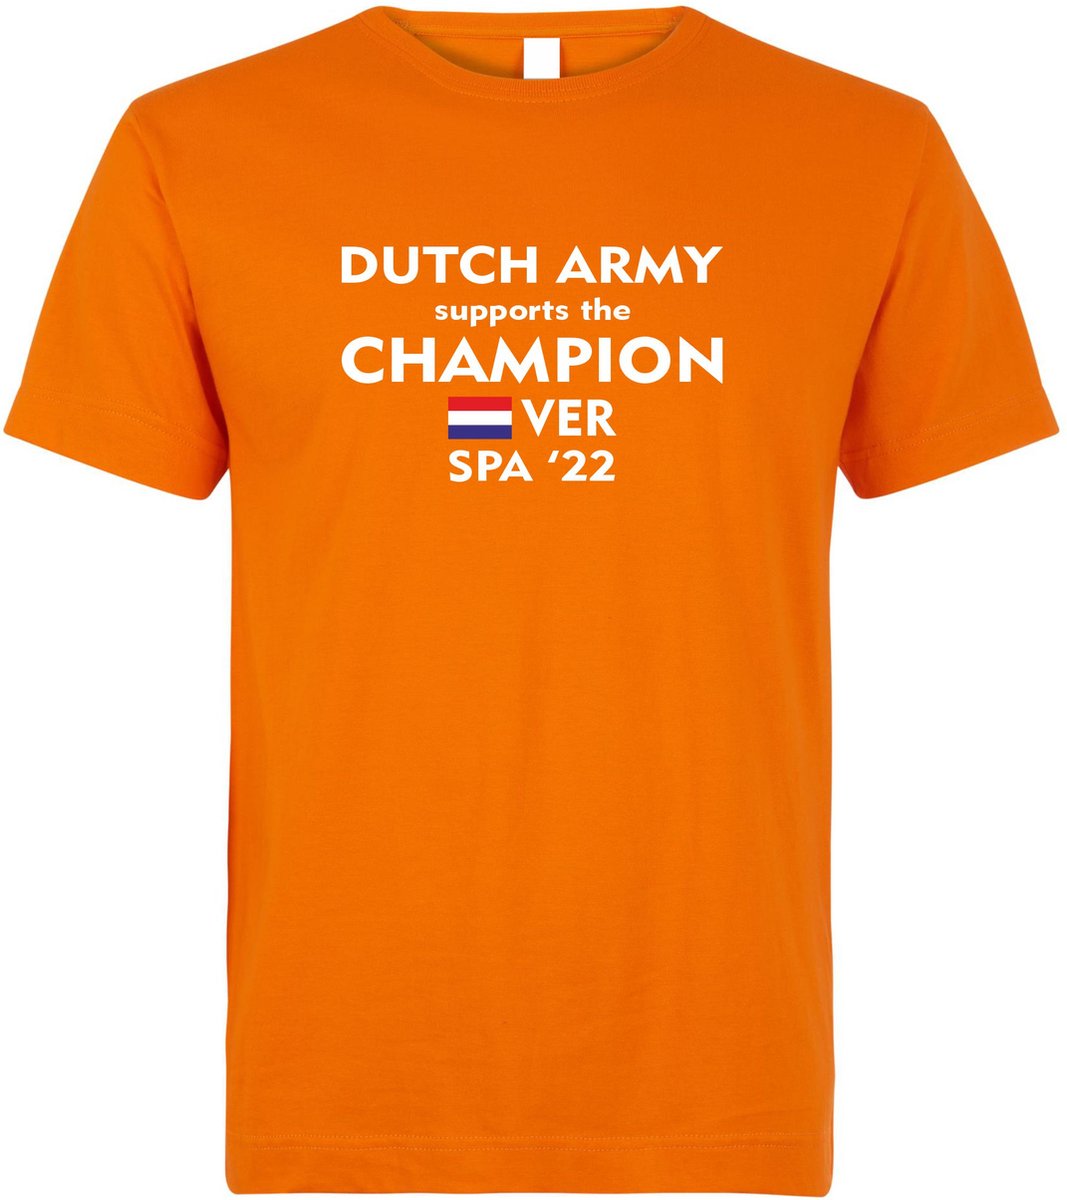 T-shirt kinderen Dutch Army supports the Champion Spa 22 | Max Verstappen / Red Bull Racing / Formule 1 fan | Grand Prix Circuit Spa-Francorchamps | kleding shirt | Oranje | maat 164